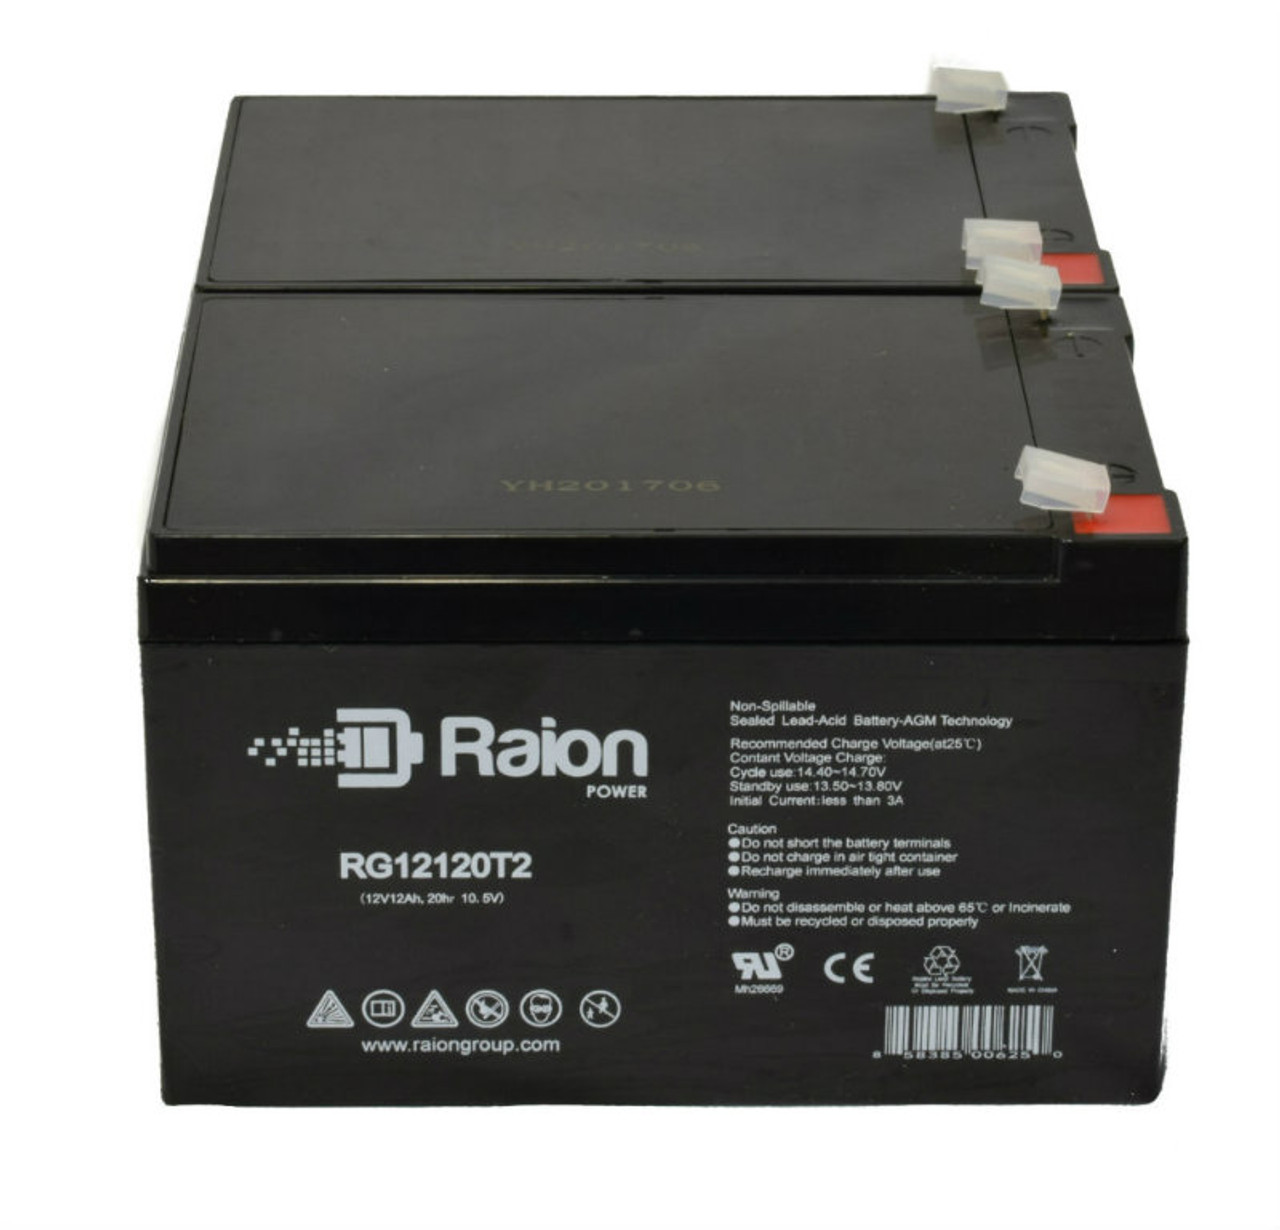 Raion Power 12V 12Ah Non-Spillable Compatible Replacement Battery for Koyosonic NP12-12 - (2 Pack)